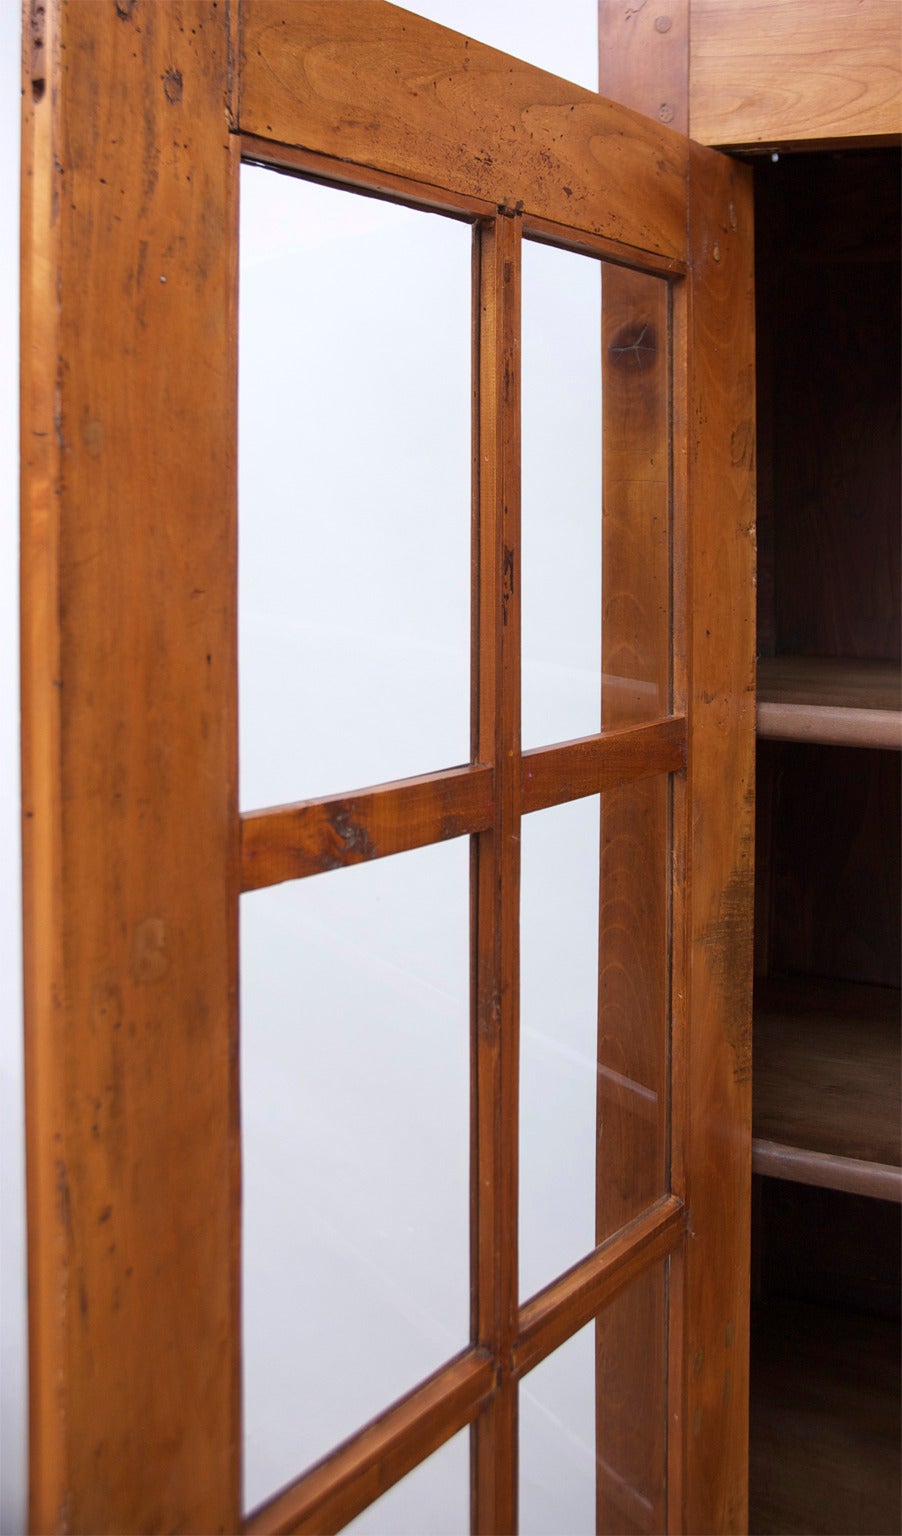 Early 19th Century 19th Century French Charles X Bookcase in Cherry